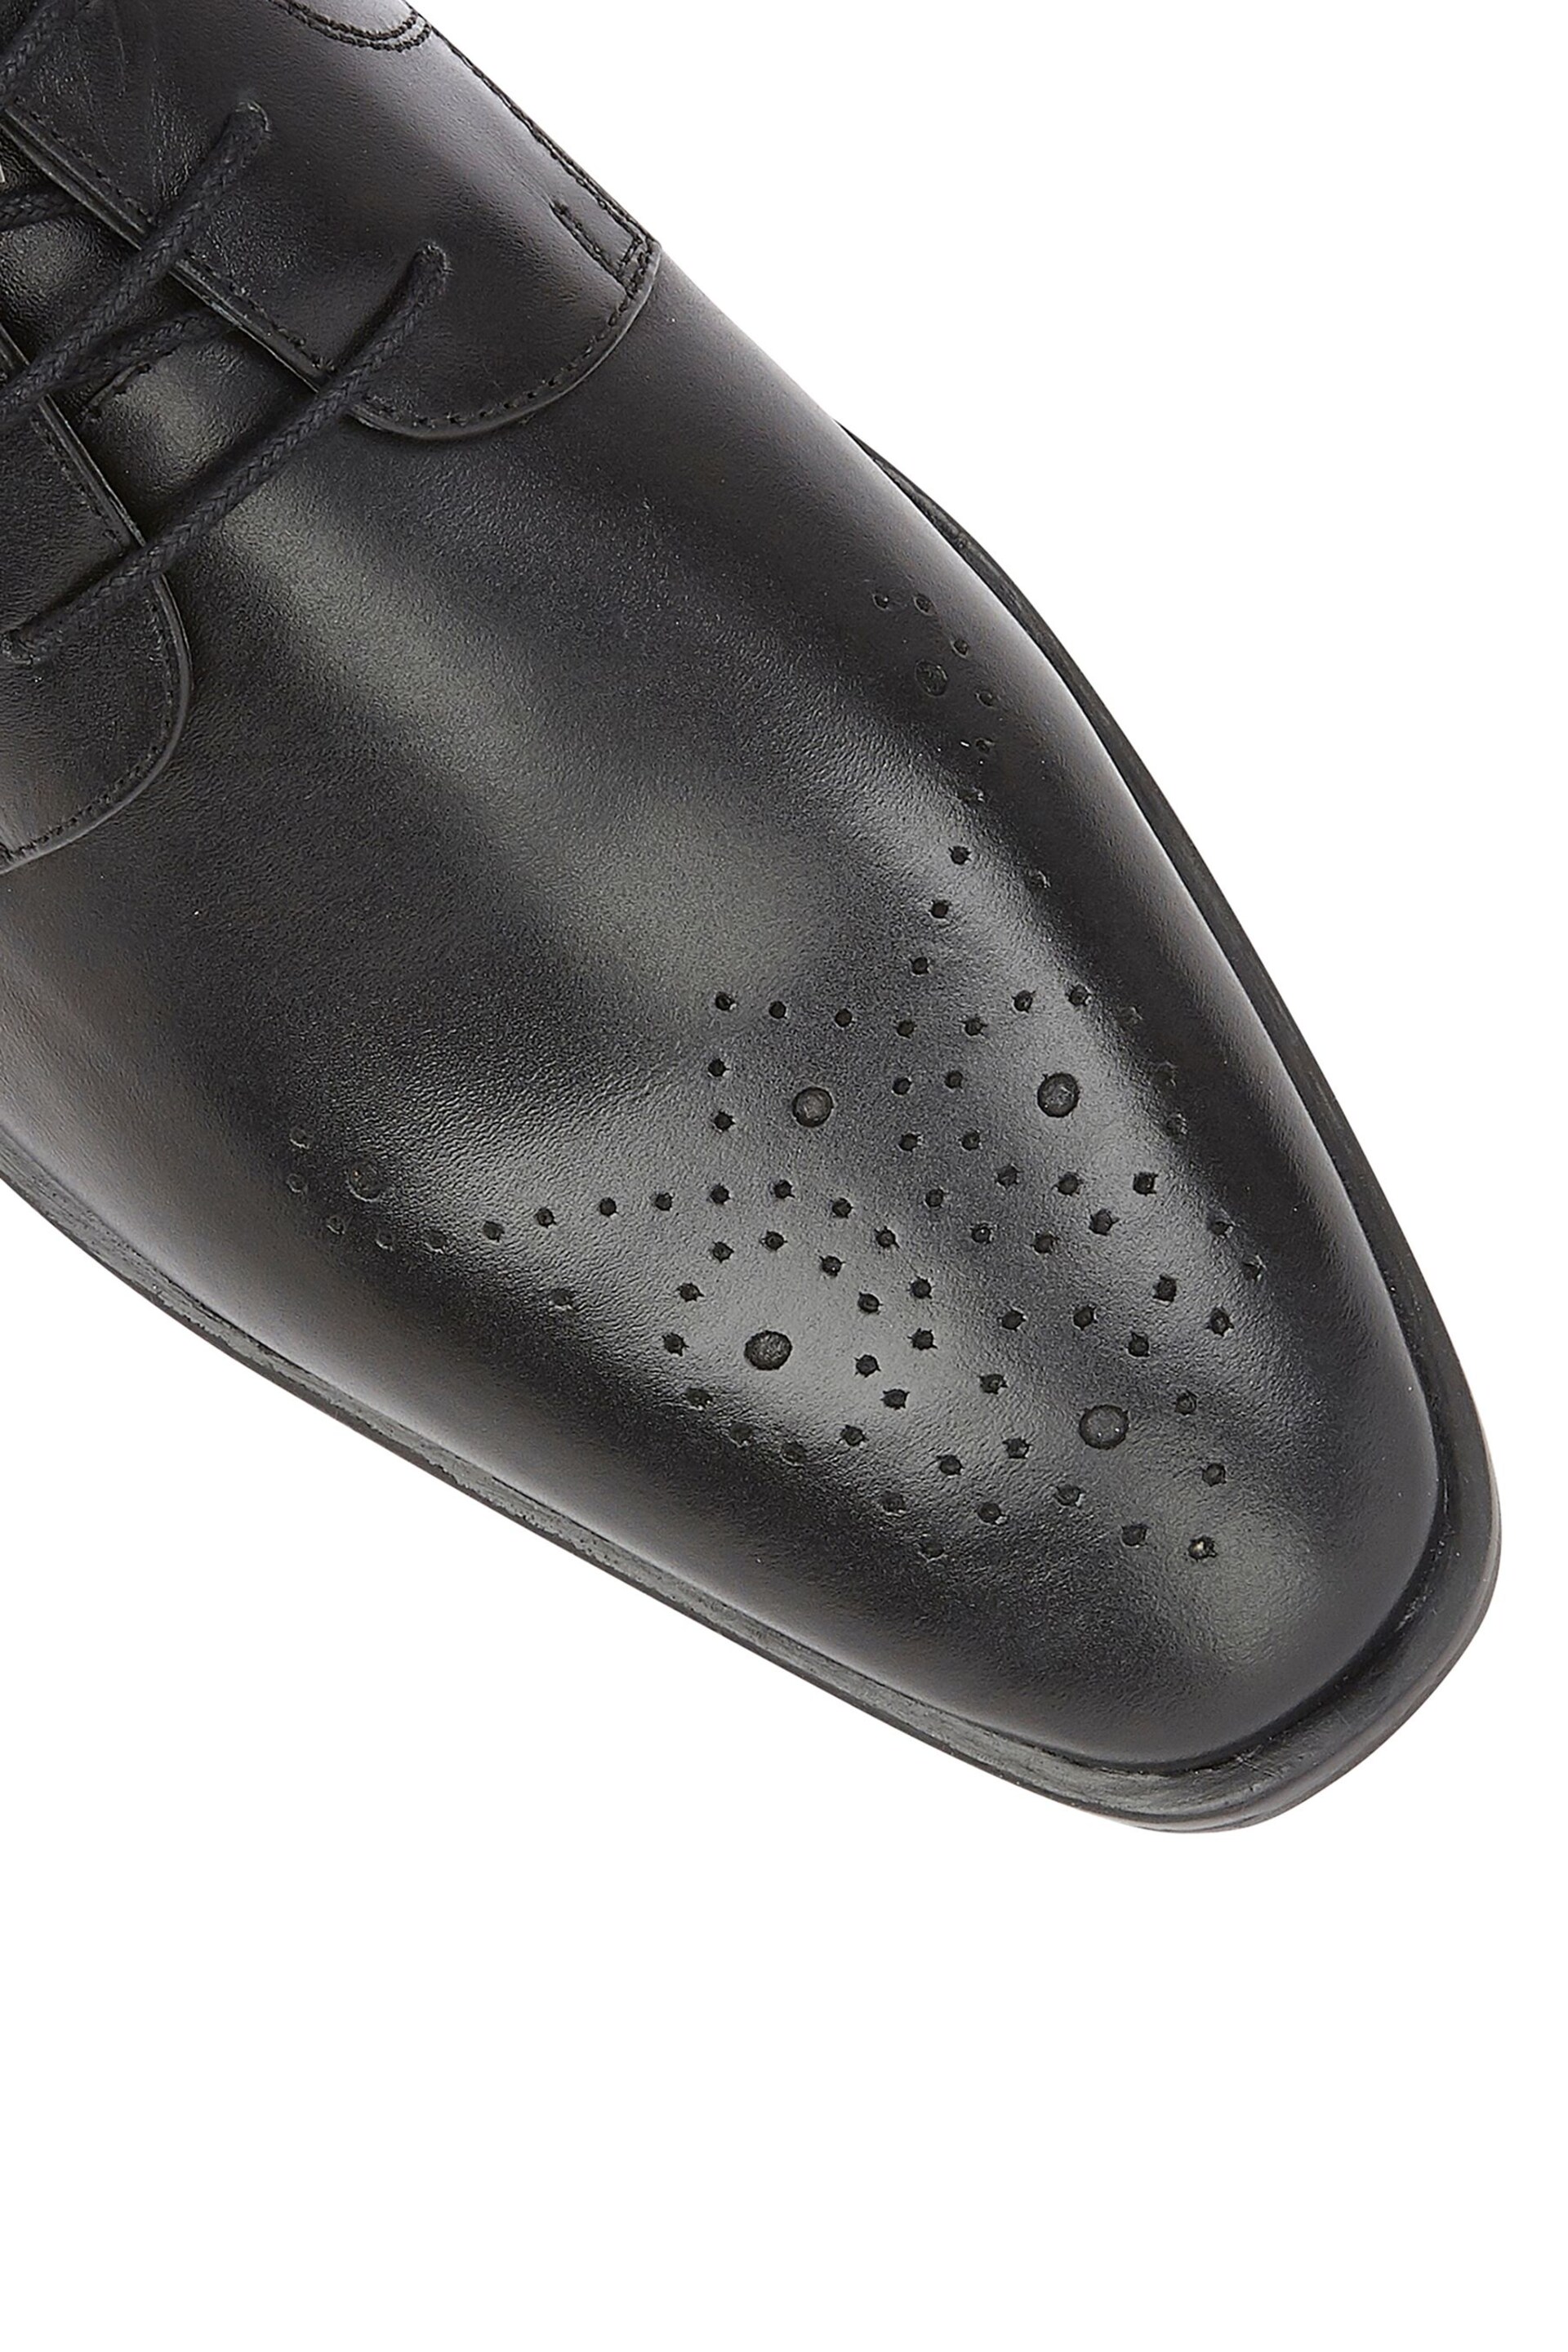 Lotus Black Olive Leather Derby Shoes - Image 4 of 4